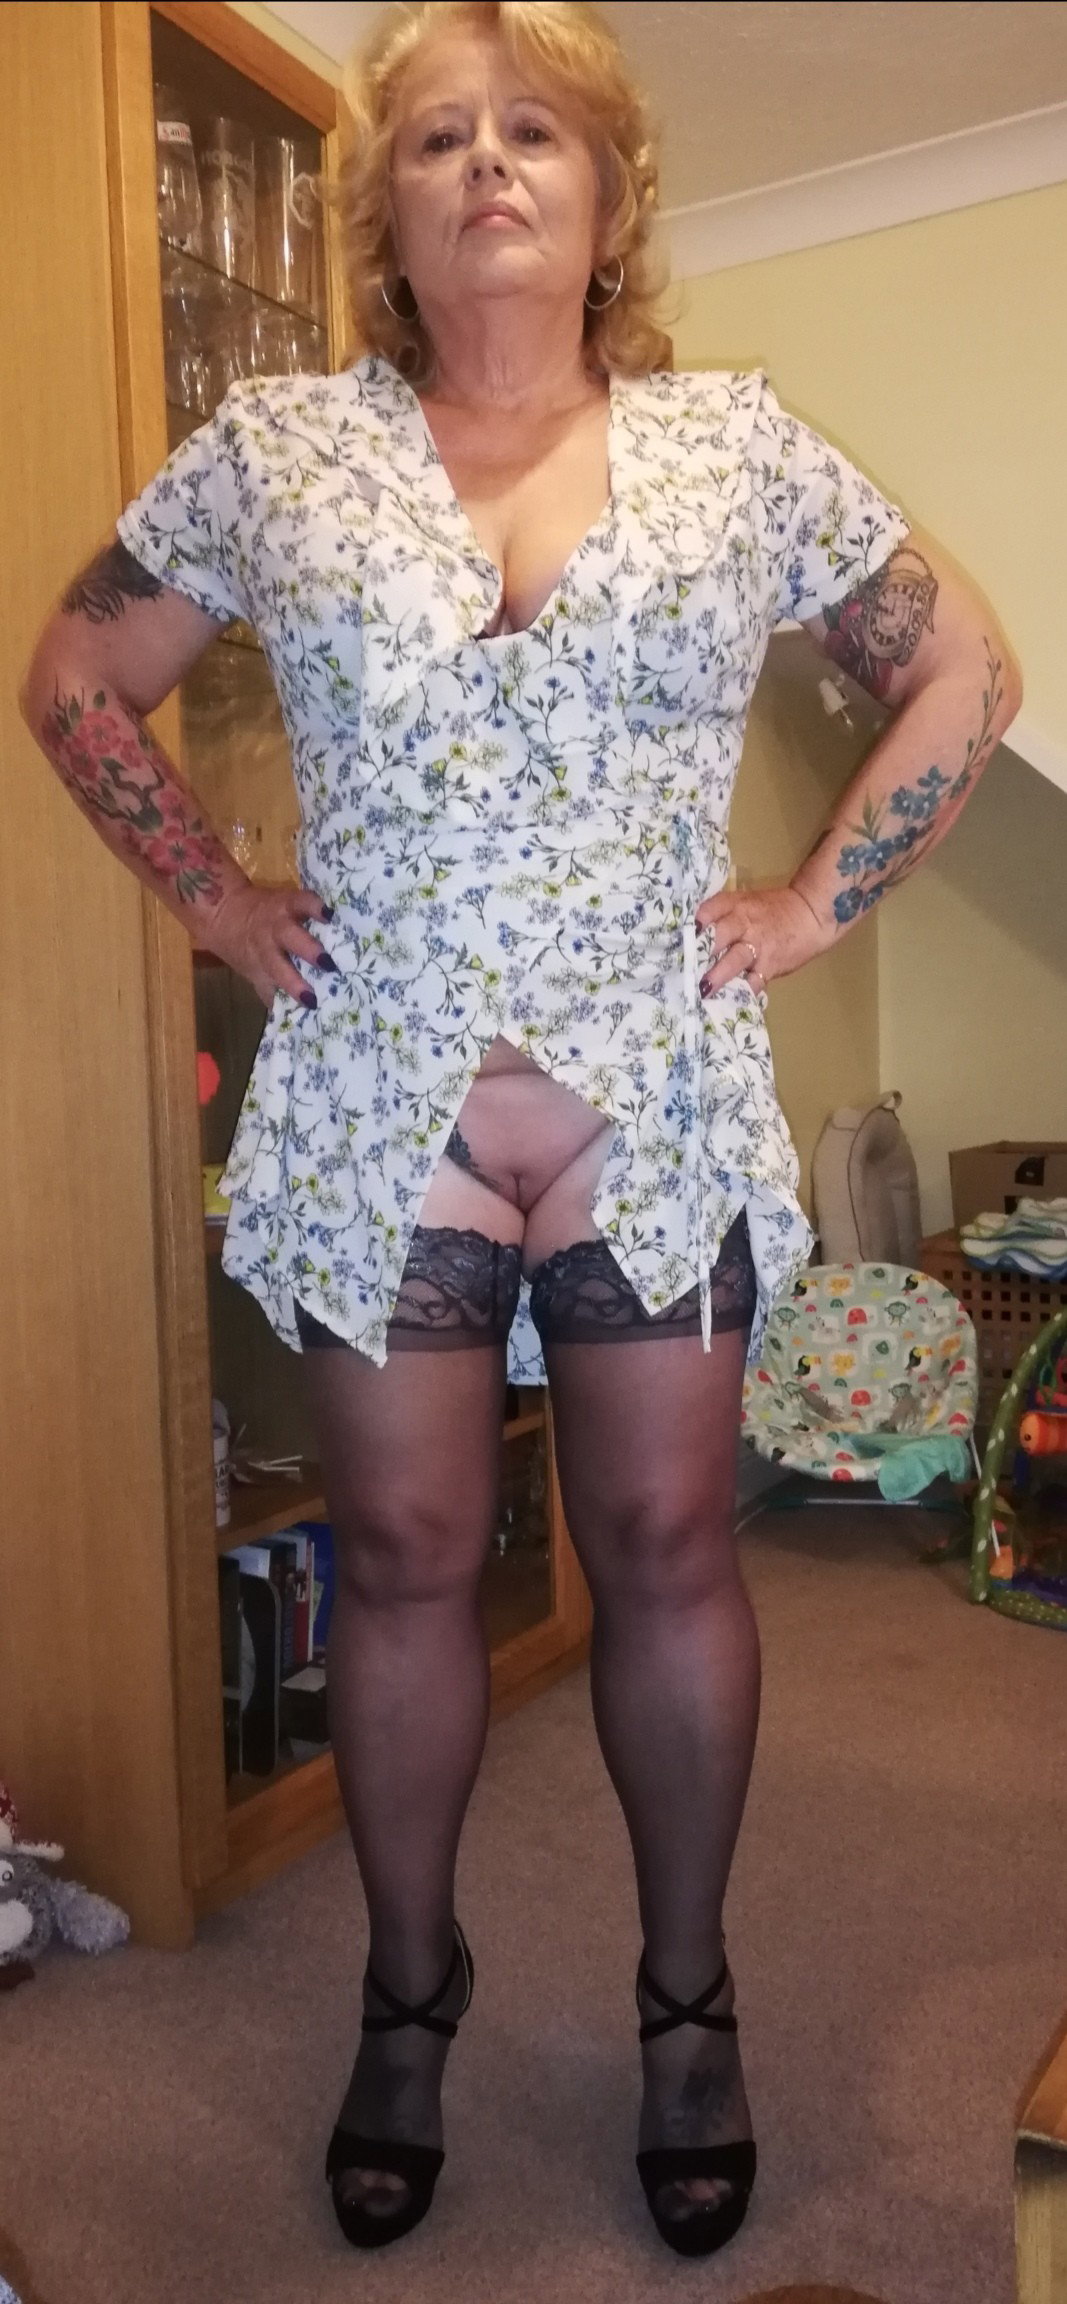 Photo by Mr. & Mrs. B with the username @Dickieboy07, who is a verified user,  December 28, 2020 at 10:20 AM. The post is about the topic Upskirt and the text says 'Thank you for all the likes, comments and share we get, the more we get the more we'll post

#hotwife #hotgirl #milf #gilf #cougar #vixen #wife #married #nan #gran #couple #tattoo #tattoos #stag #mature #MFM #mfm #MMF #mmf #threesome #moresome #heels..'